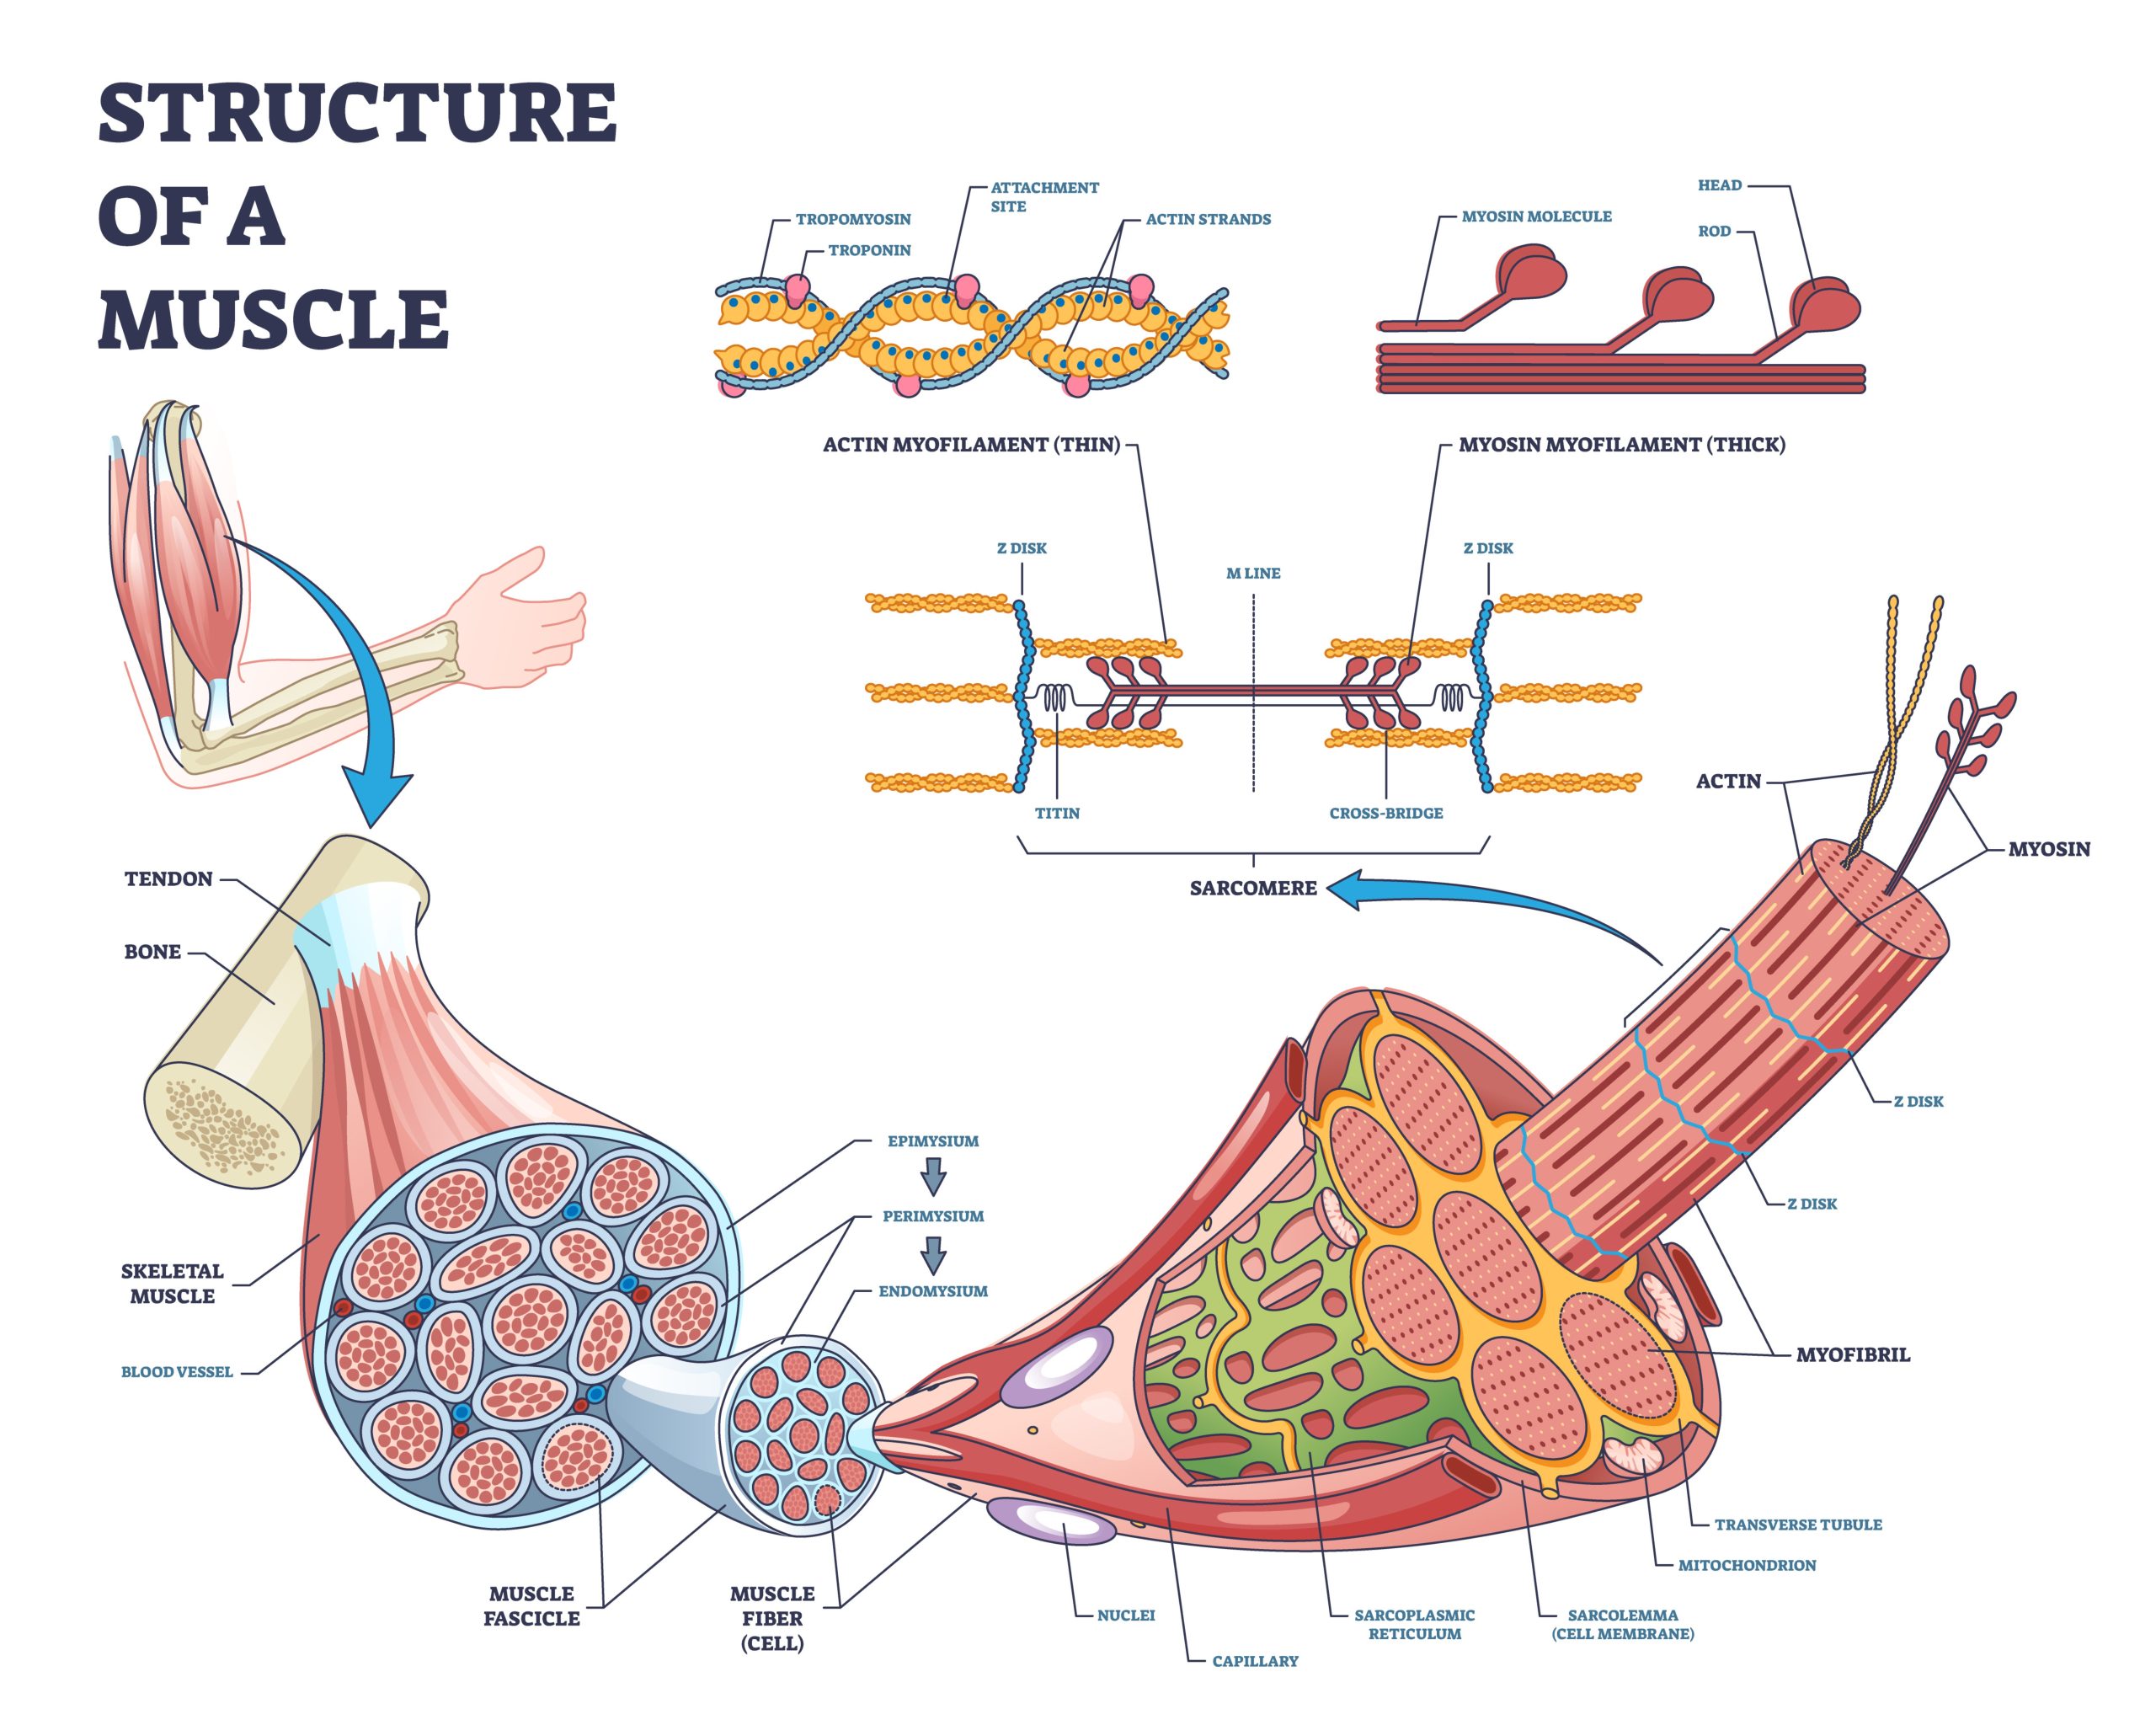 muscle cell hypertrophy